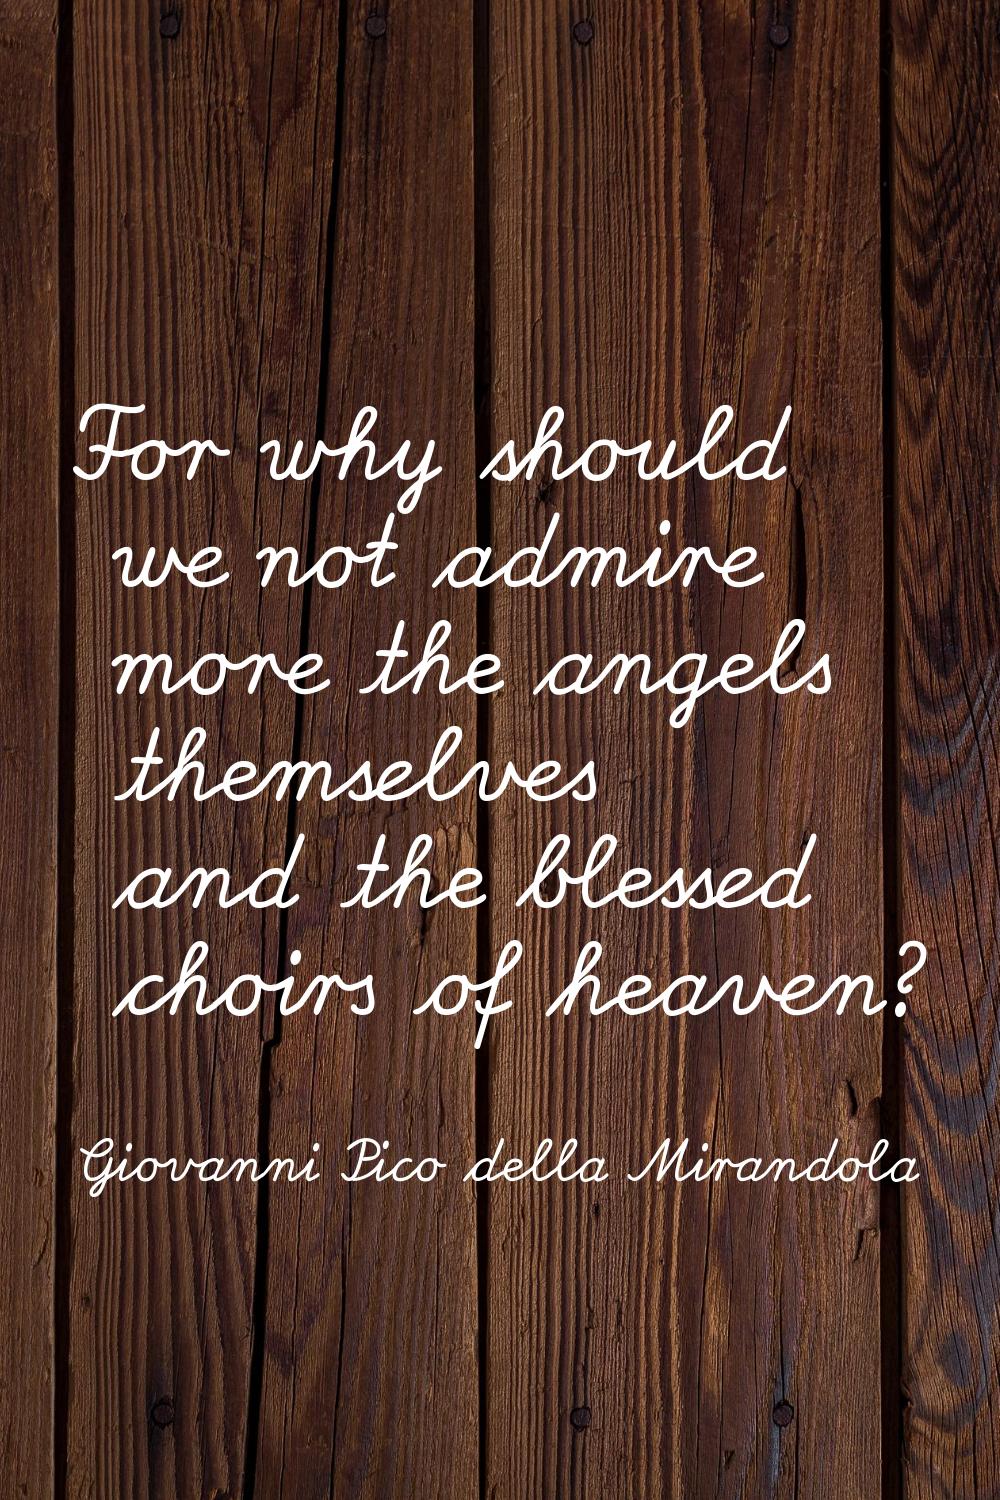 For why should we not admire more the angels themselves and the blessed choirs of heaven?